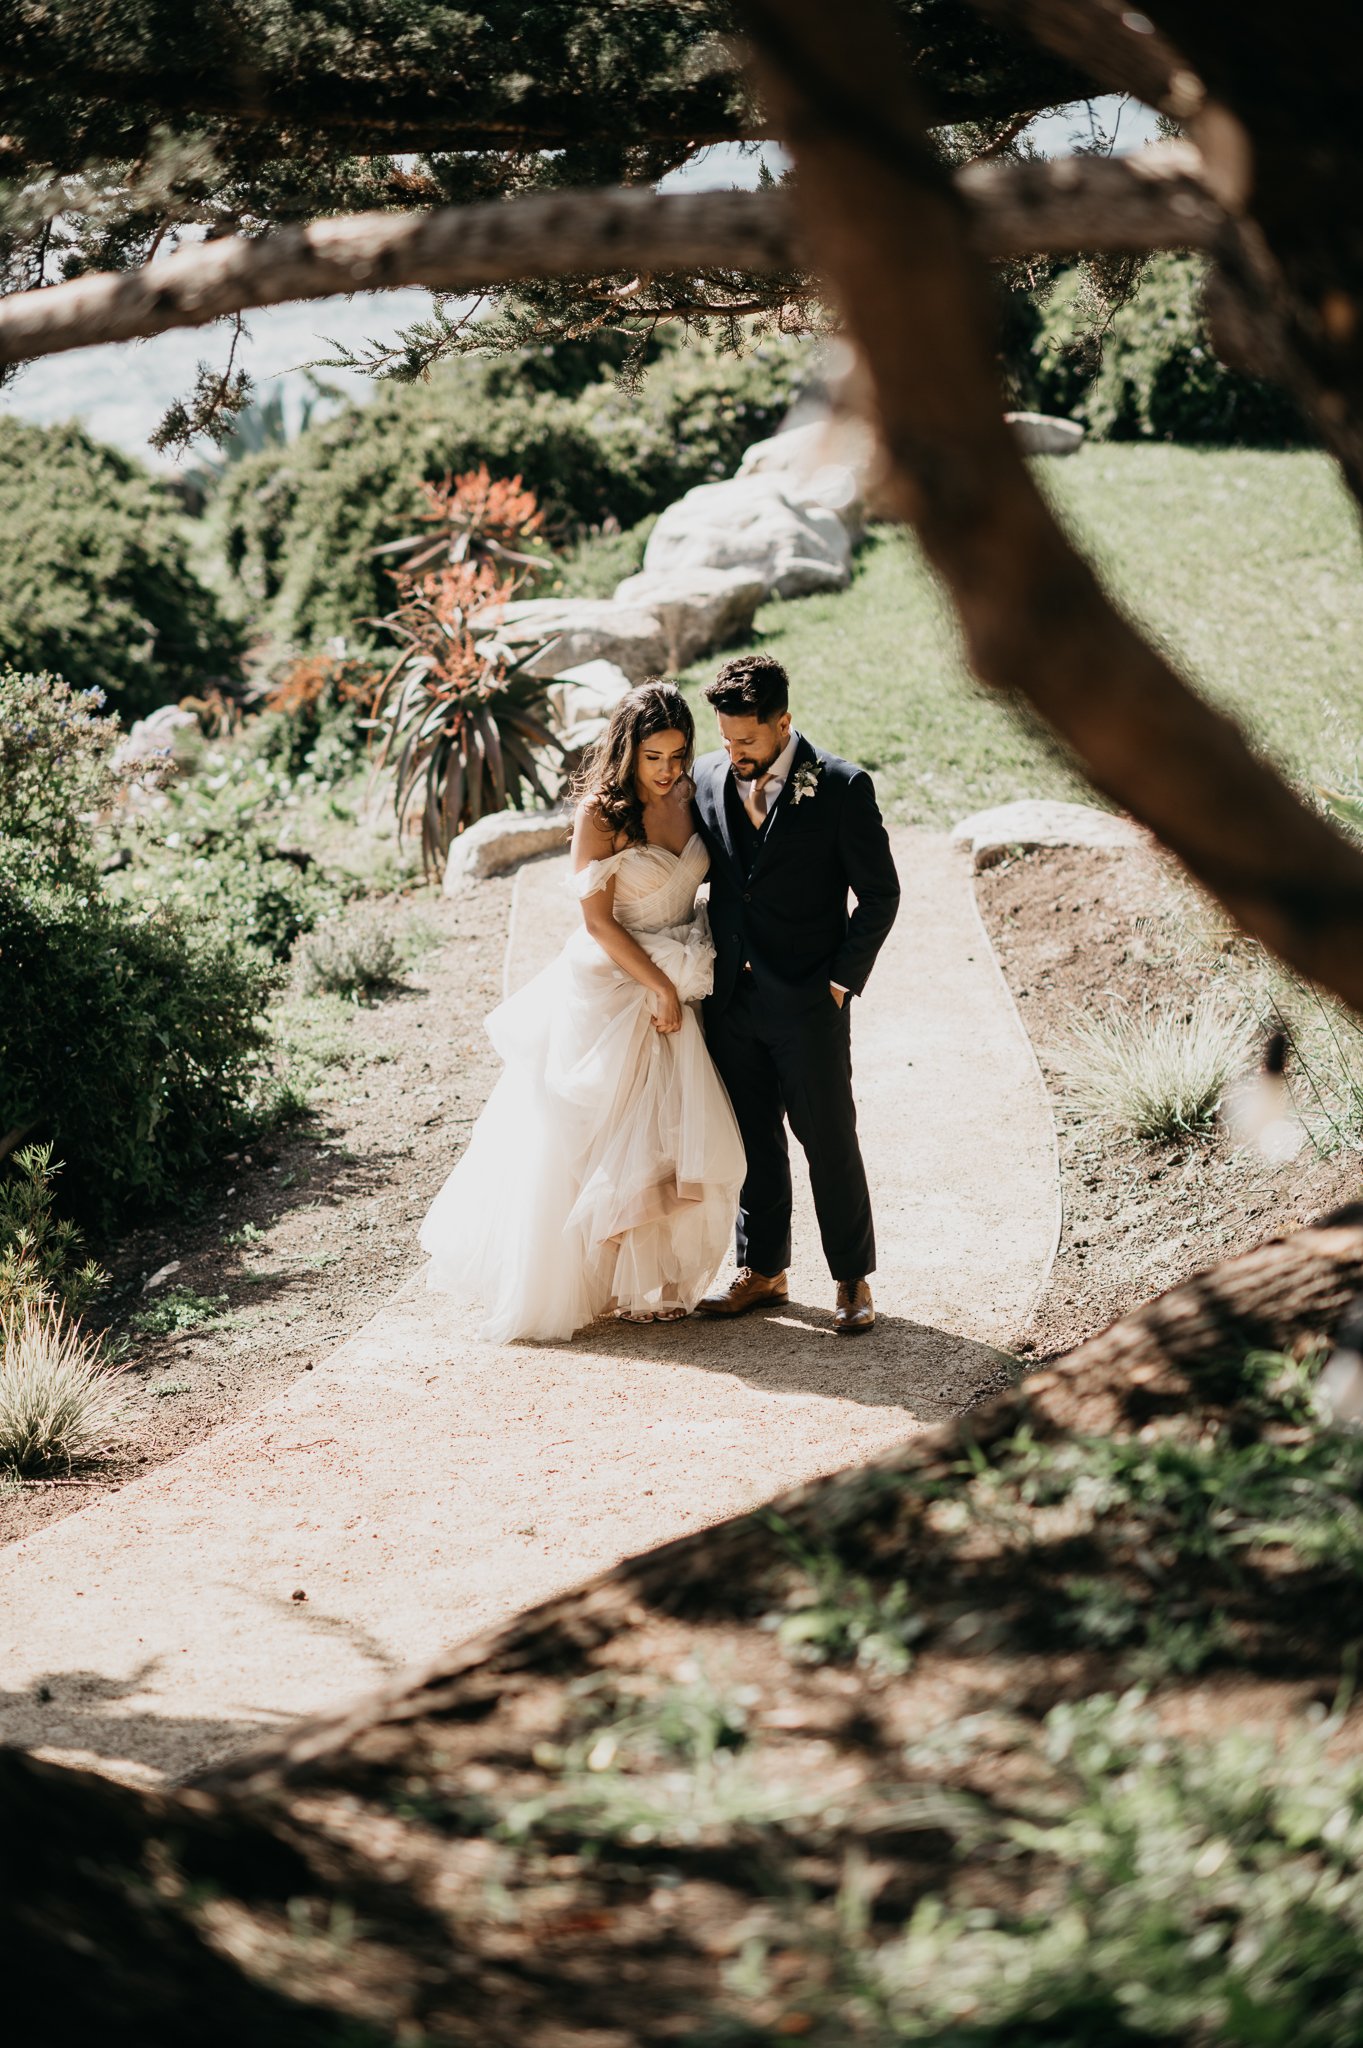 bride and groom share a private moment on garden path after ceremony